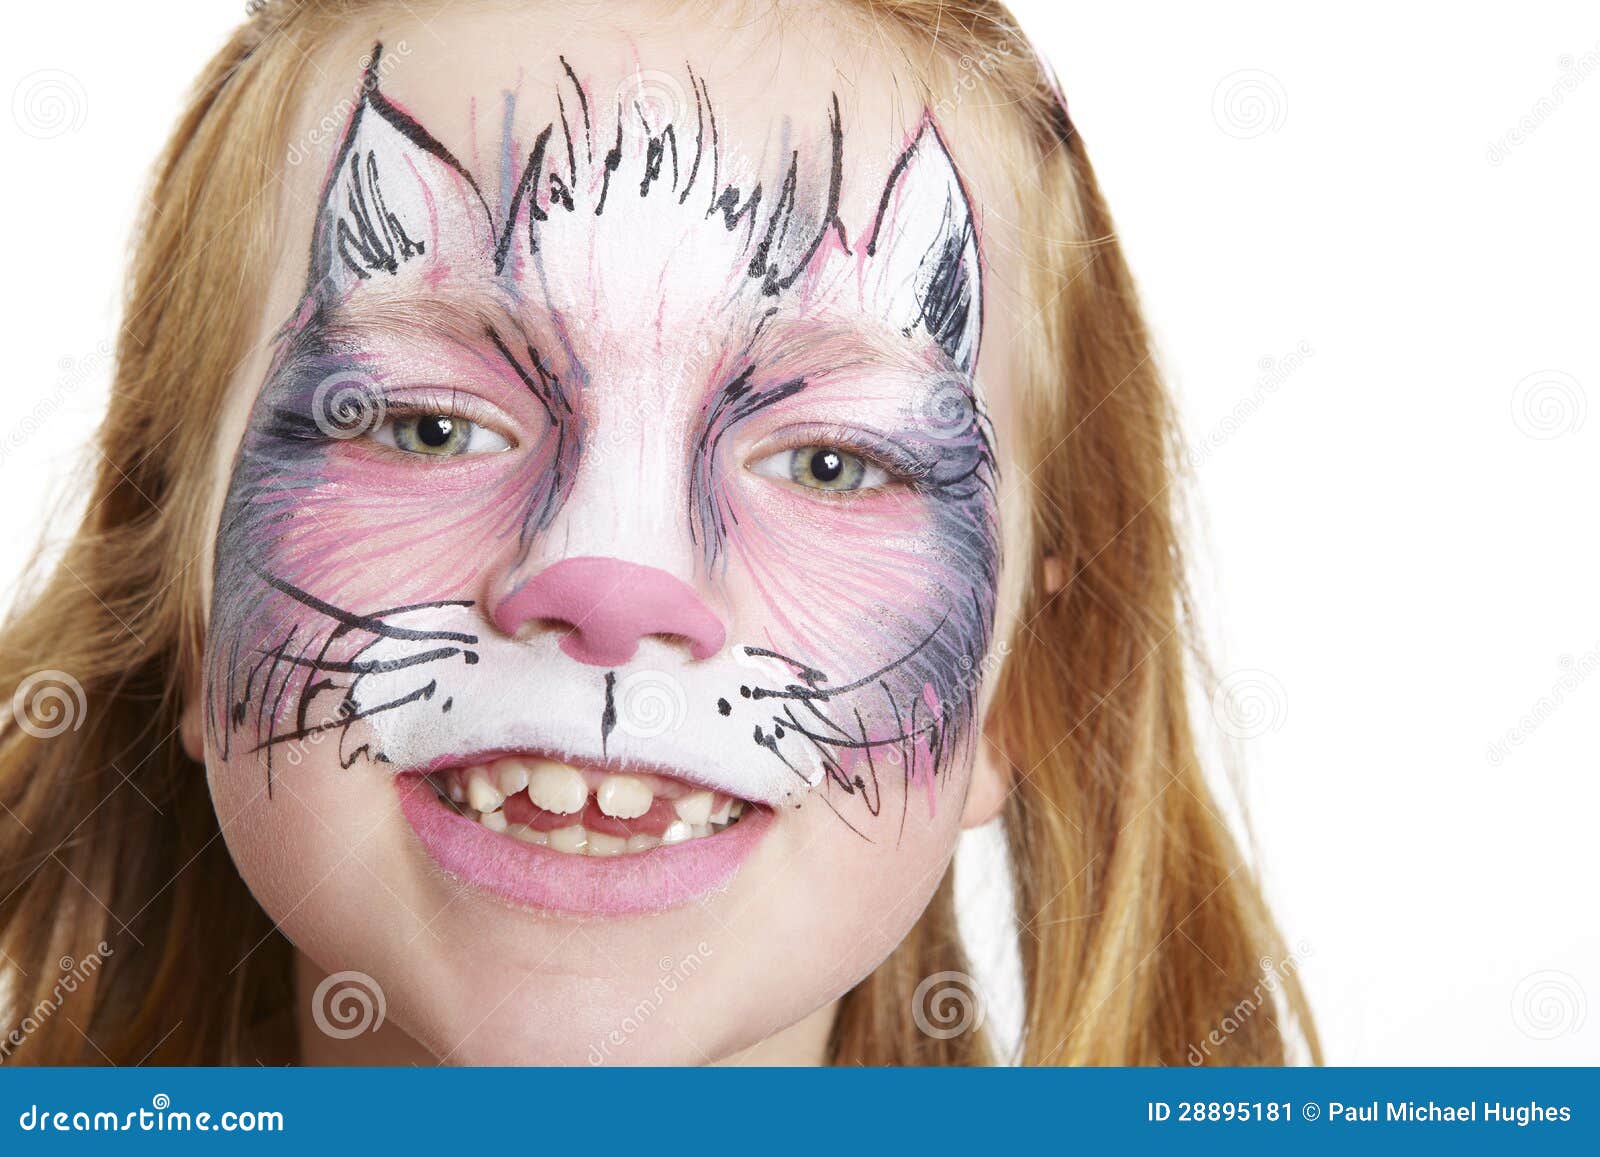 how to draw a cat face for halloween